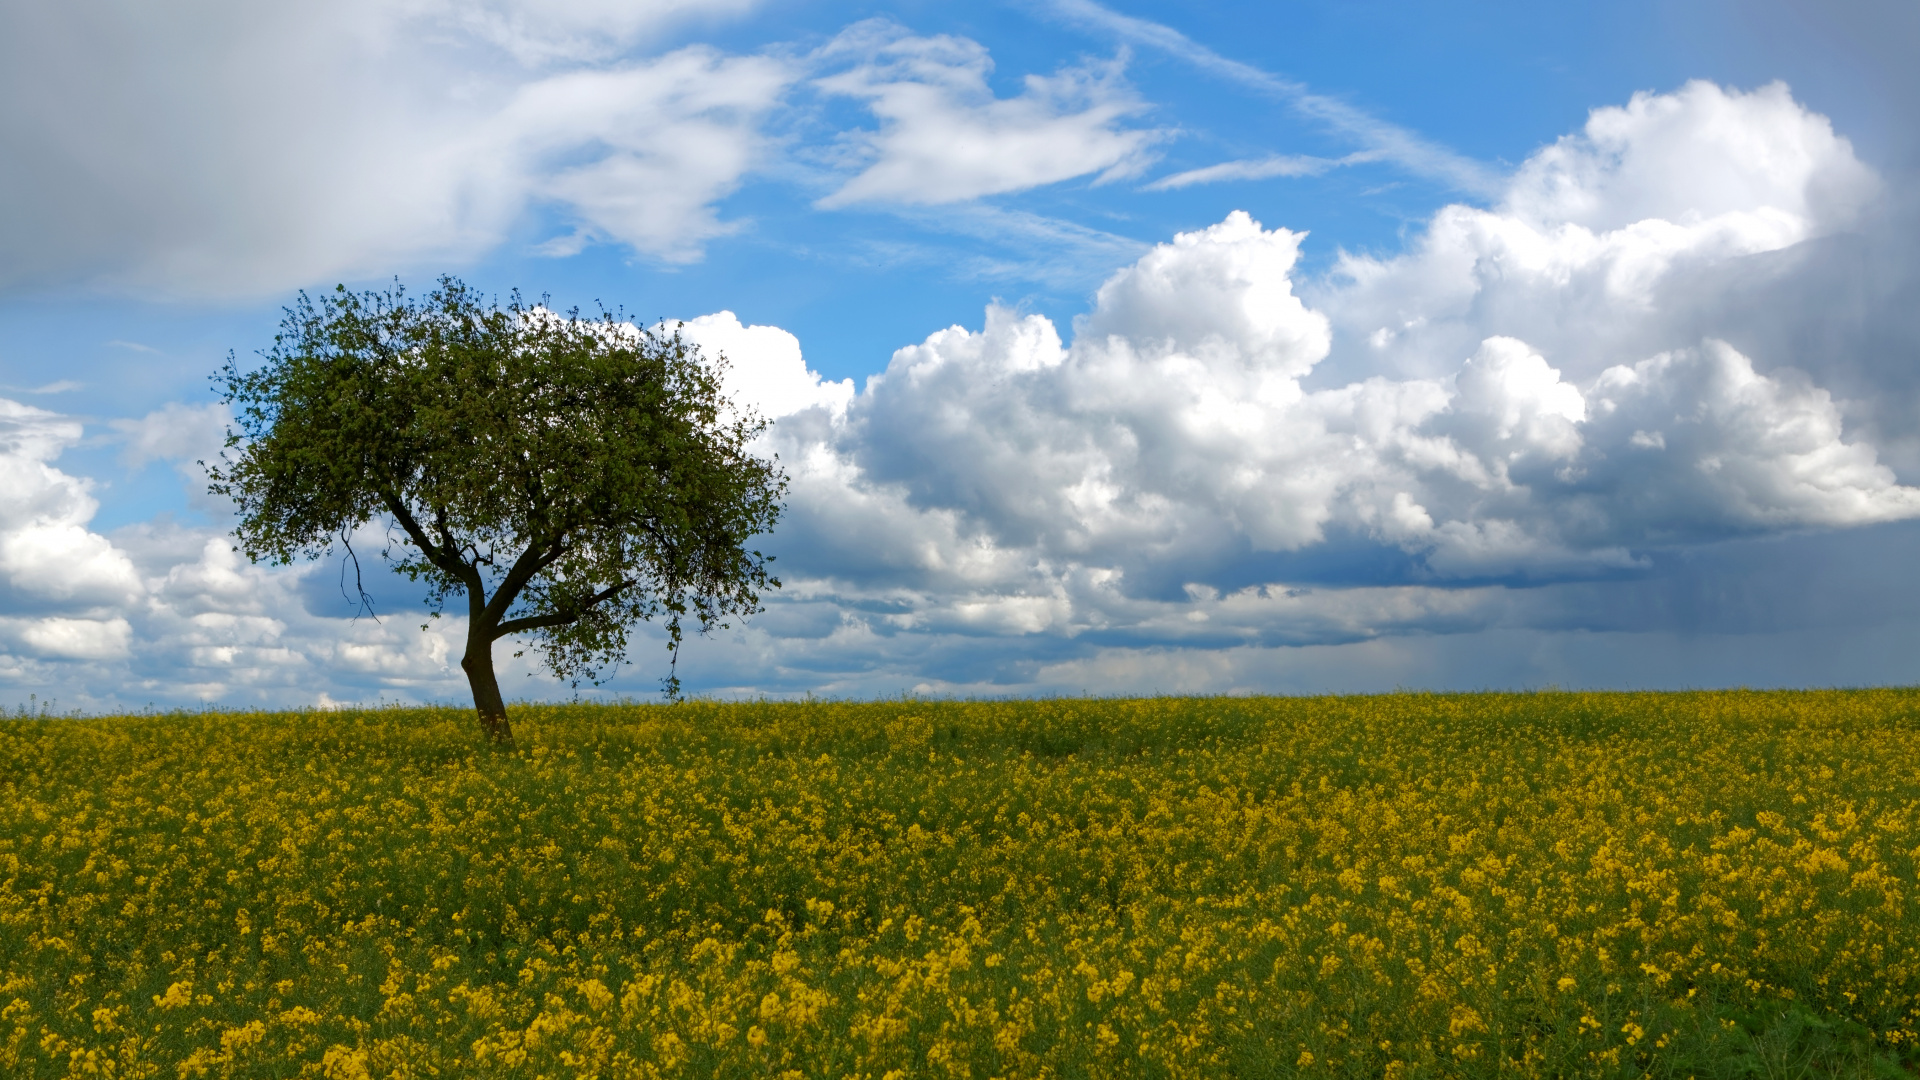 Green Grass Field Under Blue Sky and White Clouds During Daytime. Wallpaper in 1920x1080 Resolution